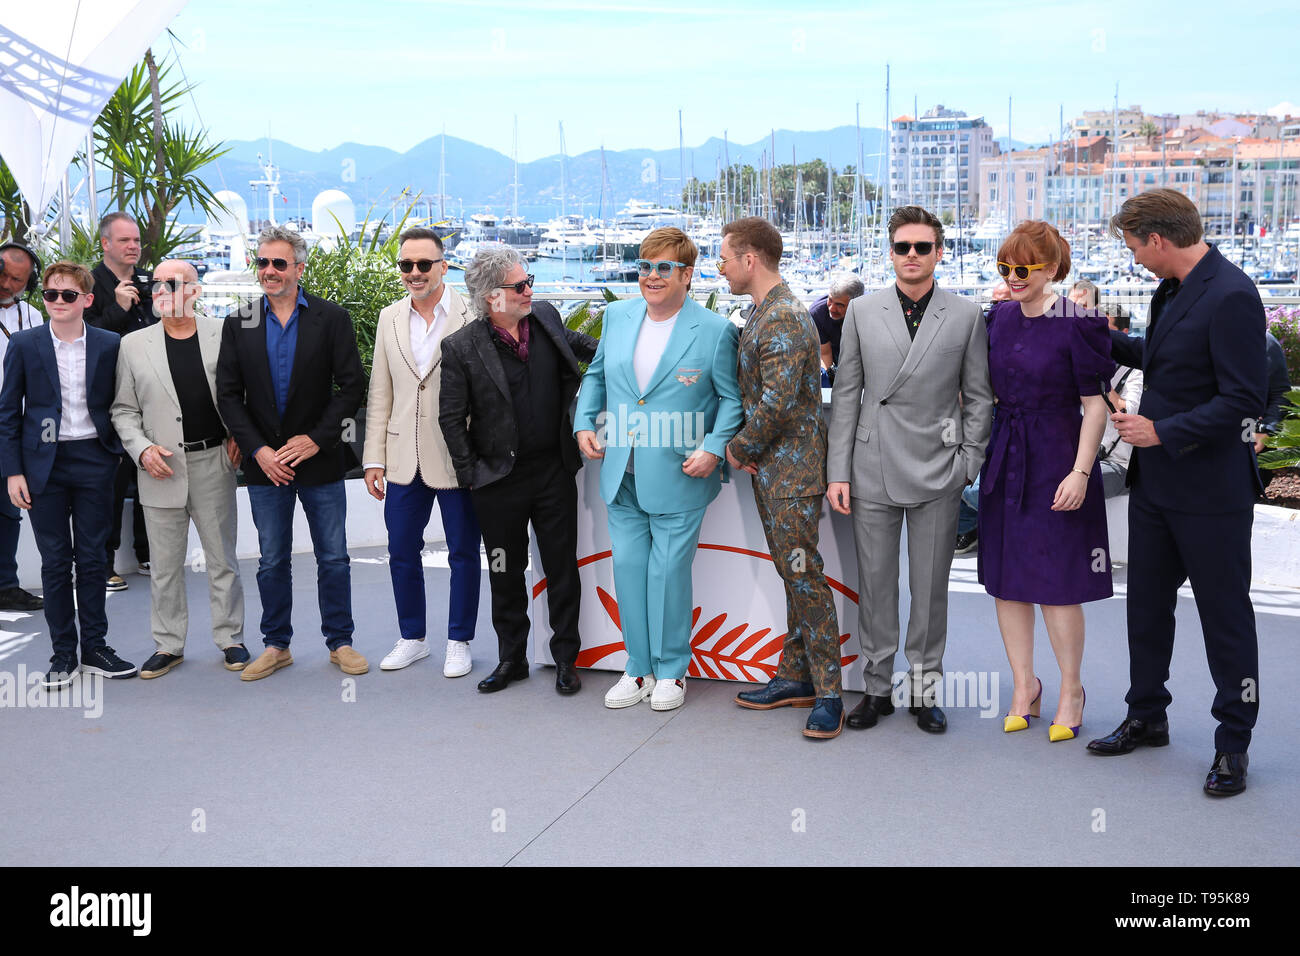 (190516) -- CANNES, May 16, 2019 (Xinhua) -- Director Dexter Fletcher (5th L), producer Elton John (5th R) and other cast members pose during a photocall for the film Rocketman screened in the Hors Competition section during the 72nd Cannes Film Festival in Cannes, France, May 16, 2019. (Xinhua/Zhang Cheng) Stock Photo